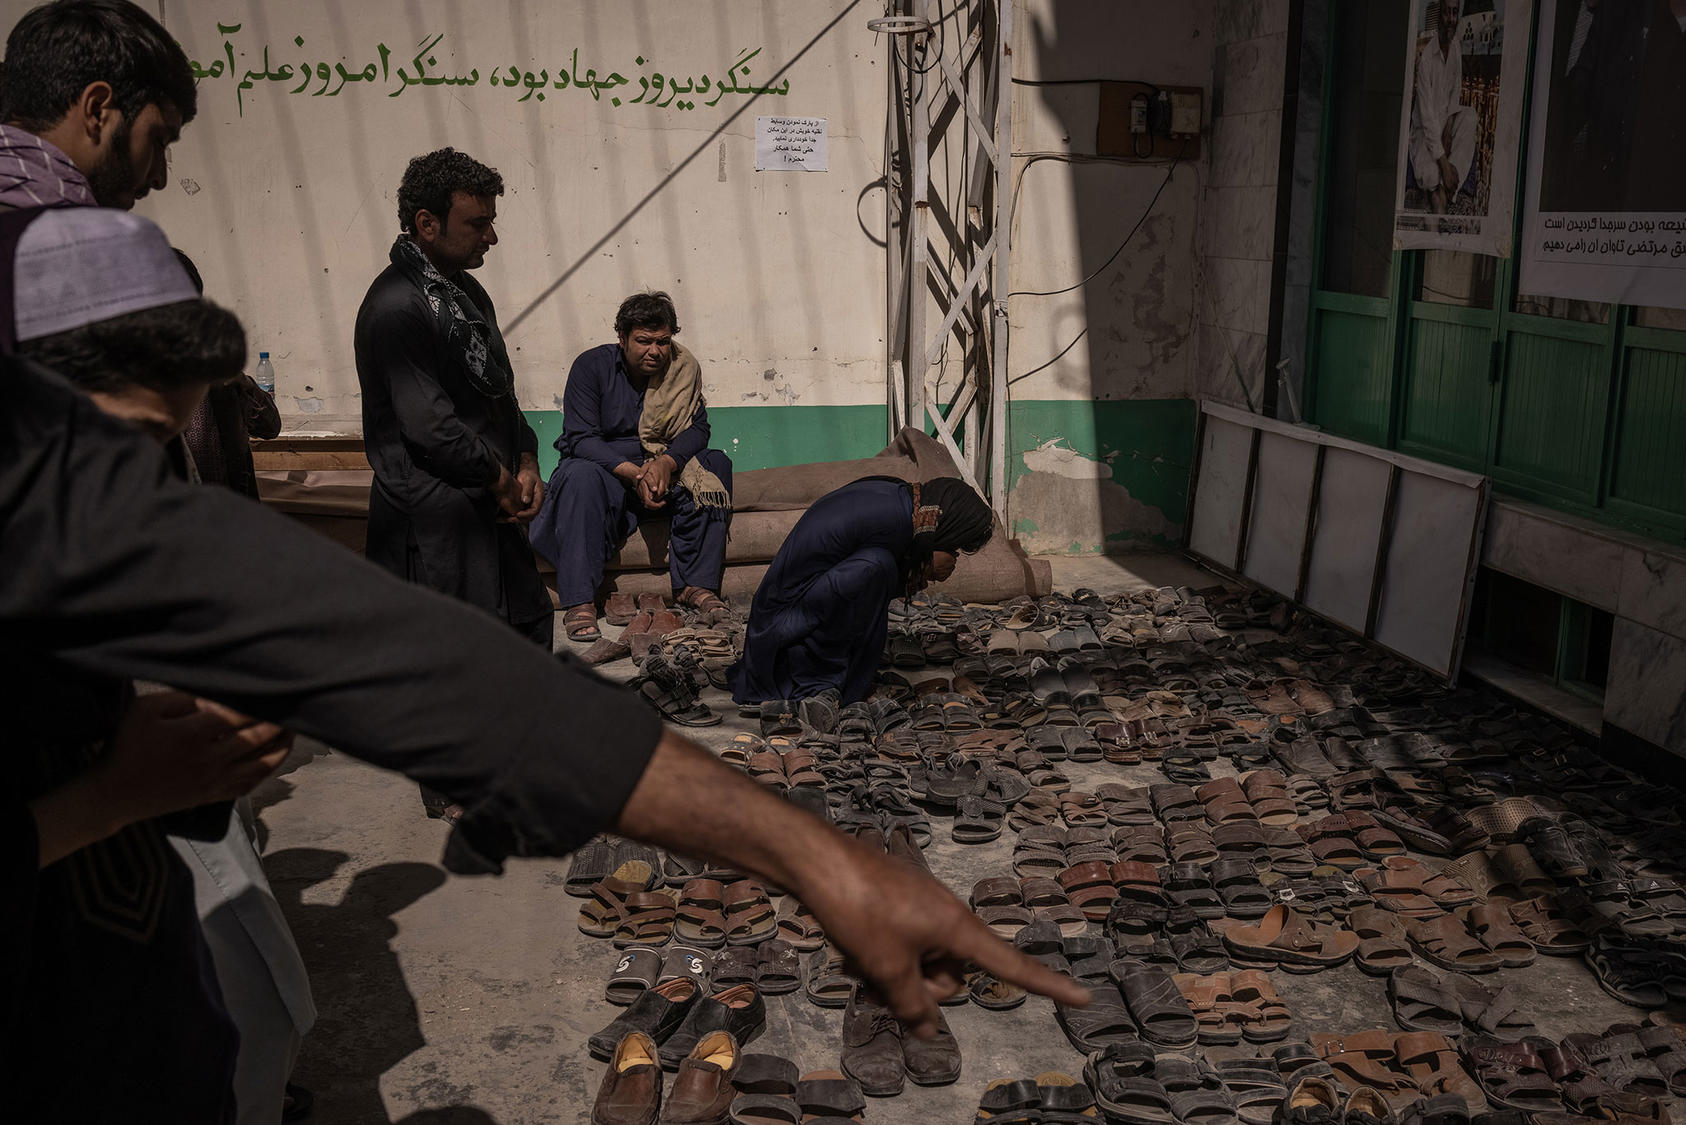 A man grieves at the Bibi Fatima Mosque, where many died in a suicide bombing, in Kandahar, Afghanistan, Oct. 18, 2021.  (Jim Huylebroek/The New York Times)